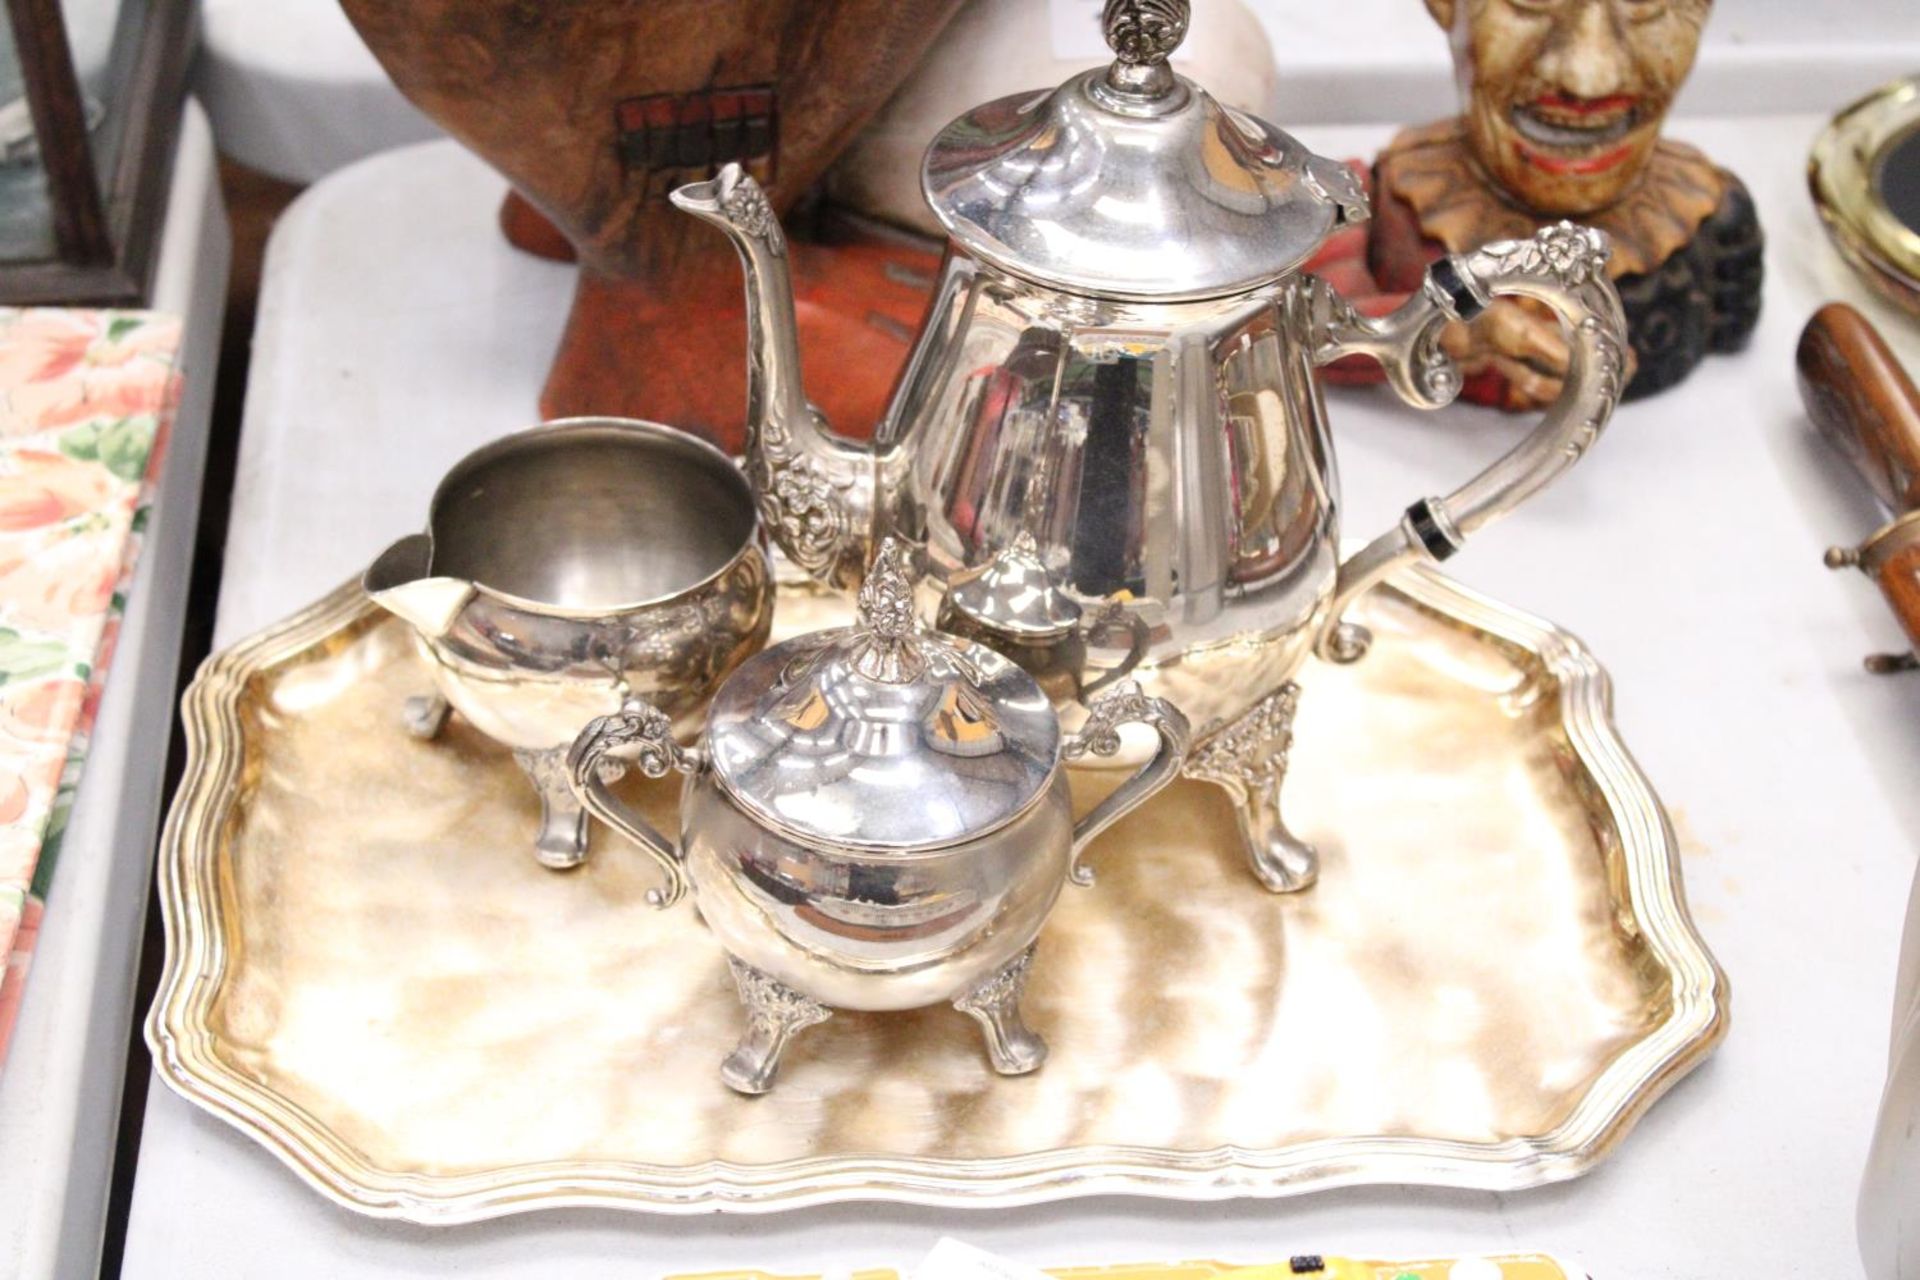 A VINTAGE SILVER PLATED COFFEE POT, MILK JUG AND SUGAR BOWL ON A TRAY